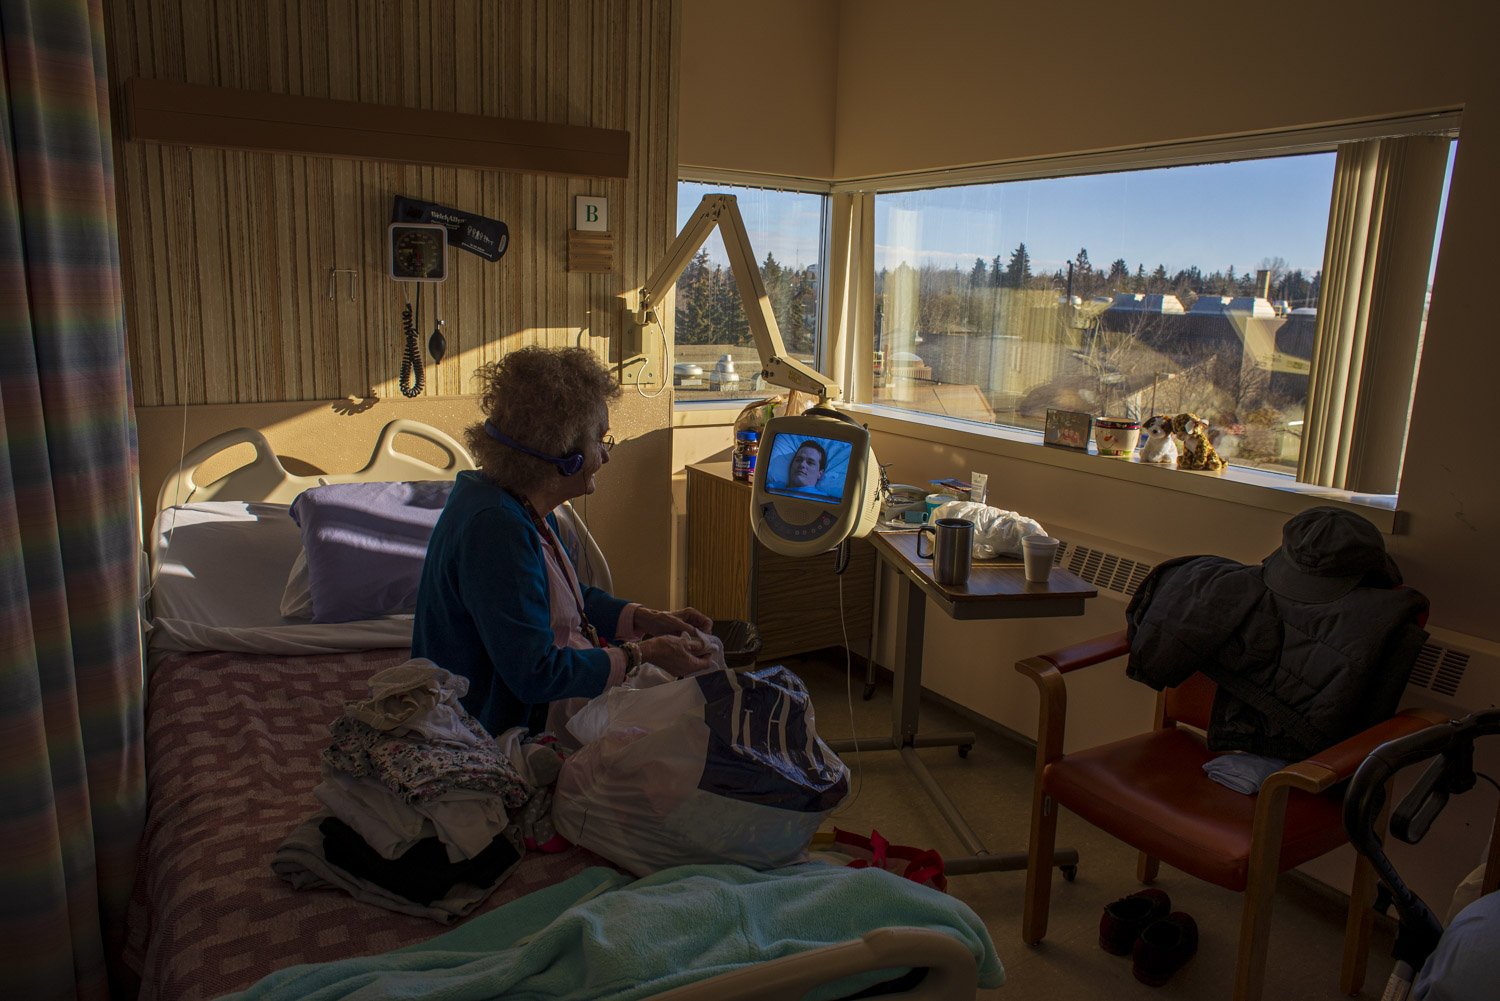  Effie folds her laundry while watching television on her hospital bed in Grande Prairie. Her monthly pension is not enough to cover a $2000 rent: the average price of a seniors housing rental available in the city. "I have no privacy at the hospital